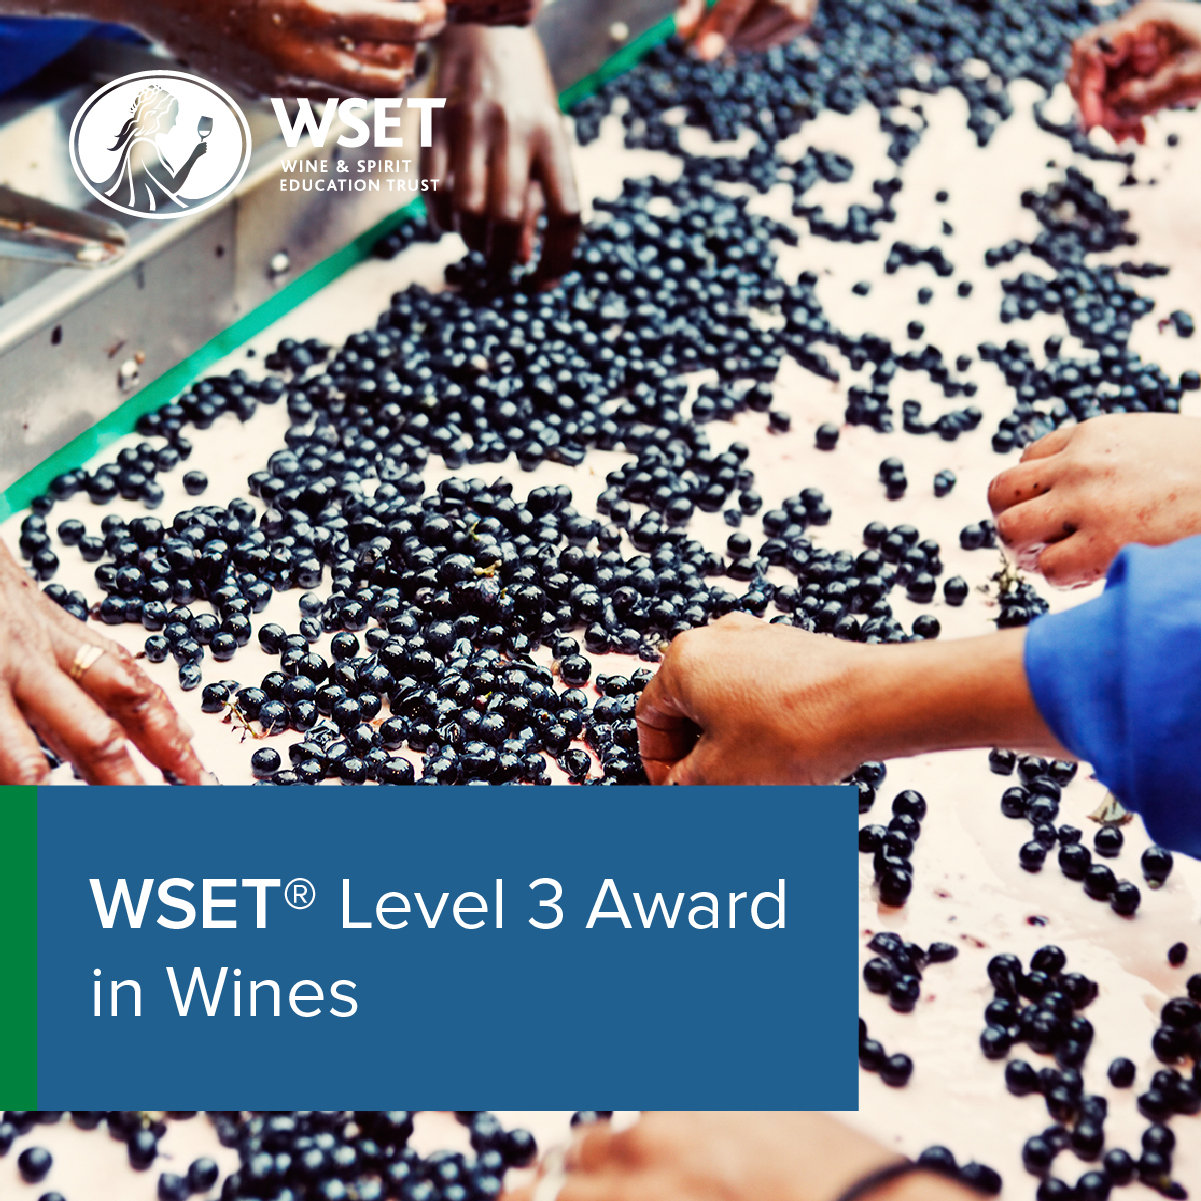 WSET Level 3 Award in Wines. WSET Wine & Spirit Education Trust logo. Many hands pick through a table of grapes.